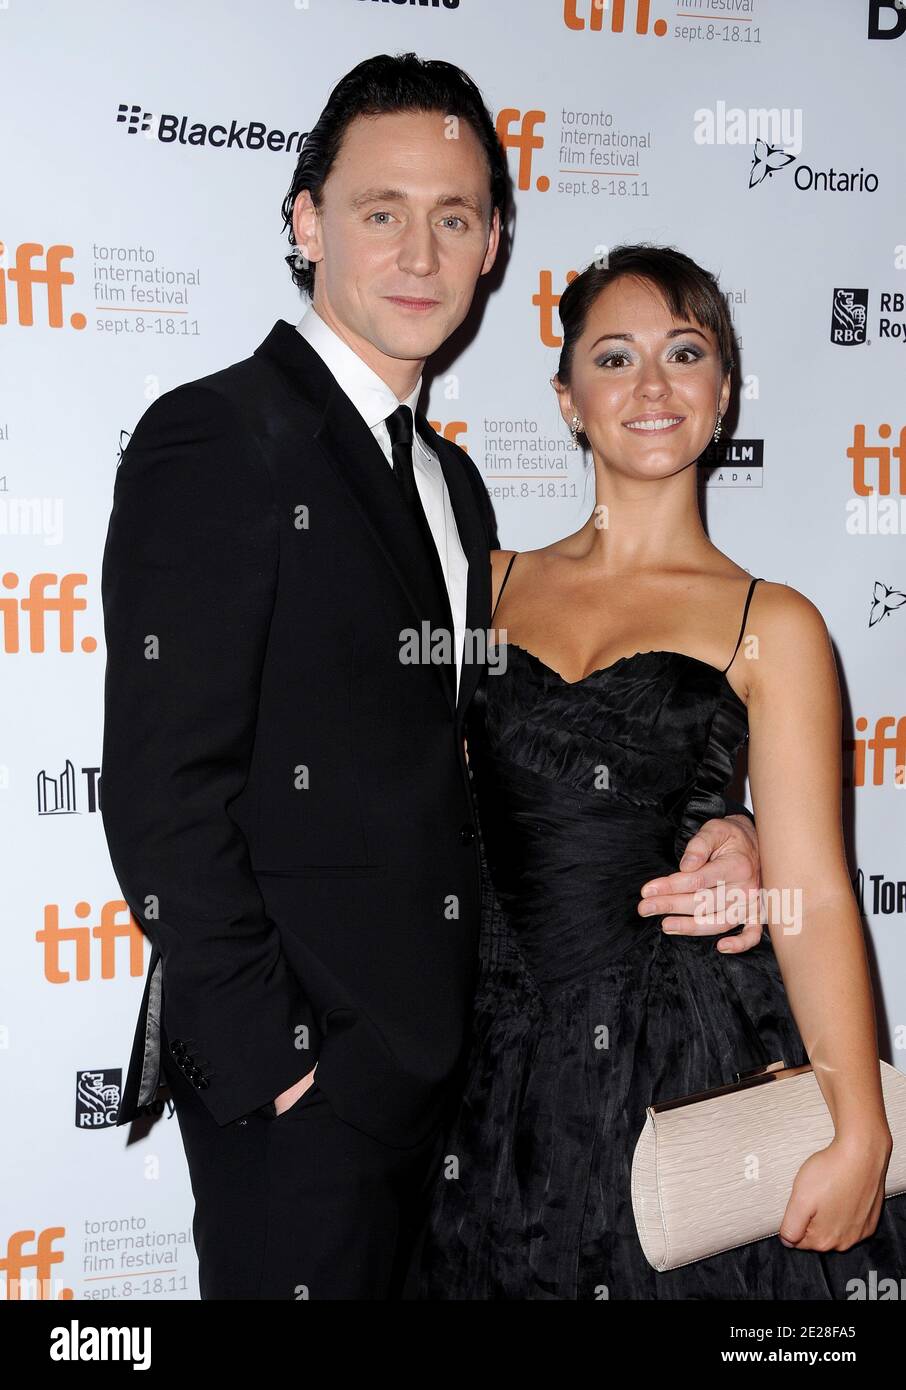 Tom Hiddleston and Susannah Fielding attend the screening of 'Deep Blue Sea' at the 2011 Toronto International Film Festival, in Toronto, Canada on September 11, 2011. Photo by Lionel Hahn/ABACAPRESS.COM Stock Photo